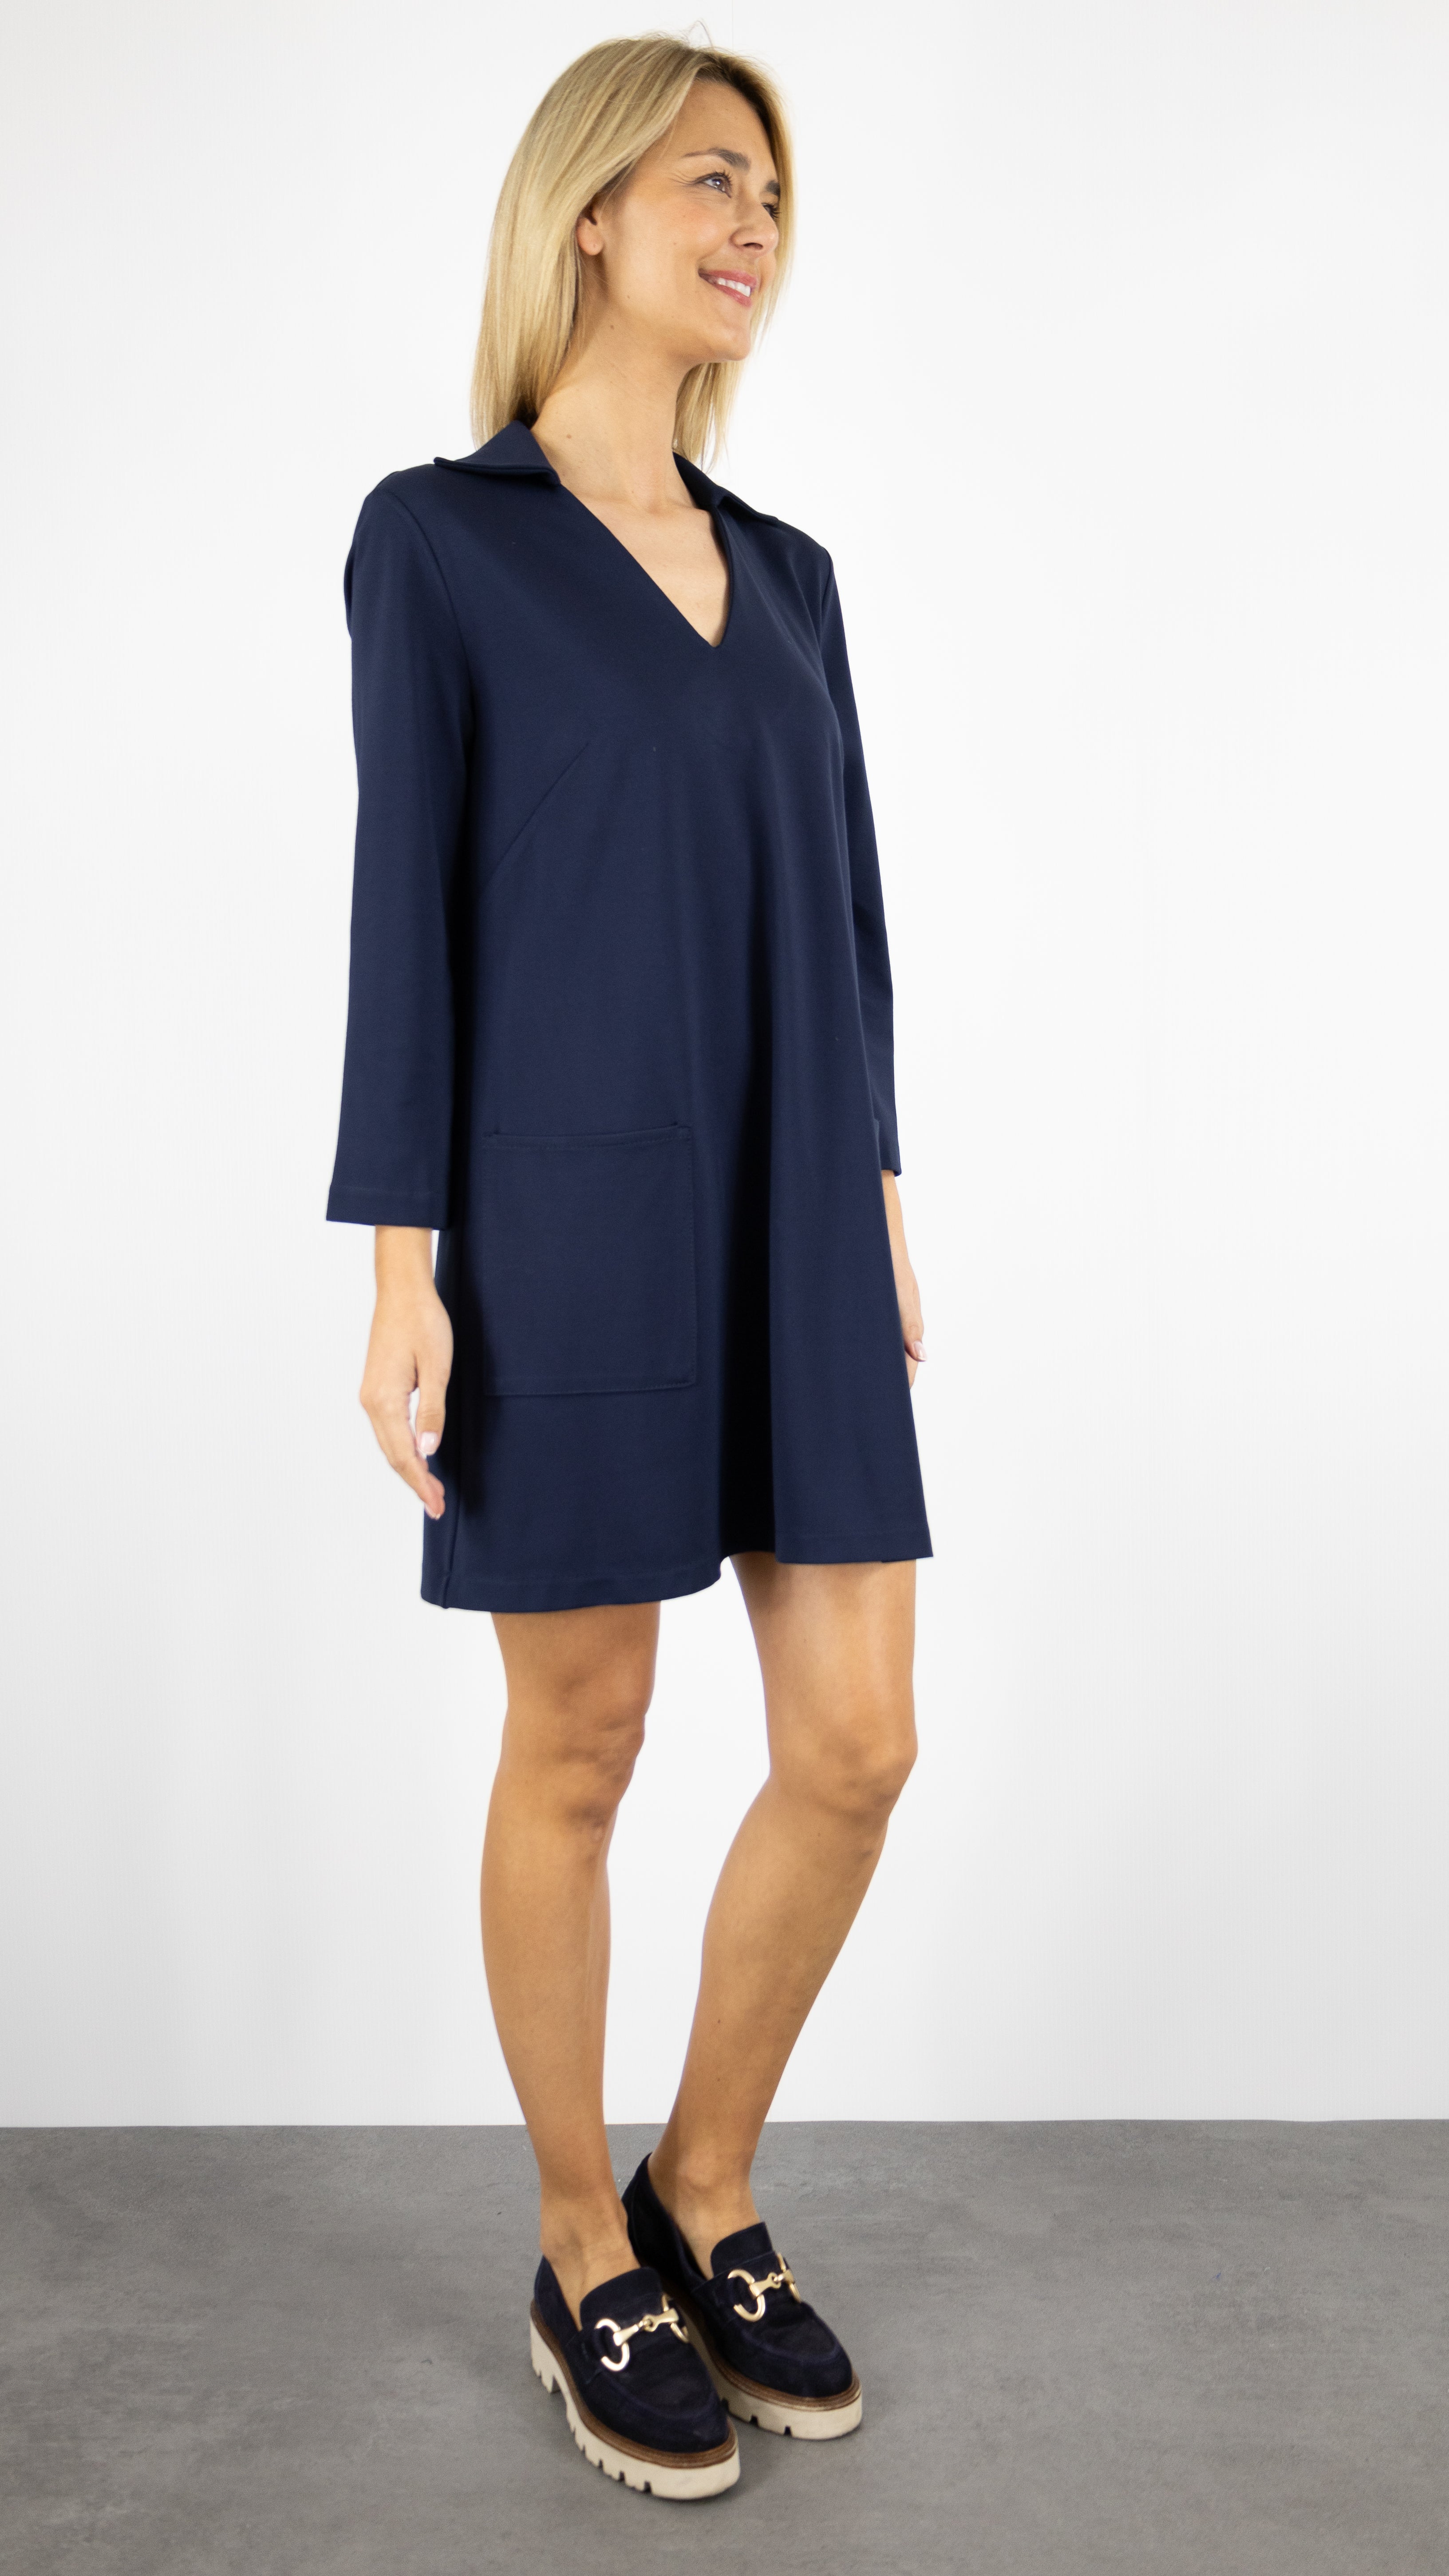 ROBE COURTE EN JERSEY COL CHEMISE AECRHAE IMPERIAL BLEU MARINE#color_1680/BLU SCURO